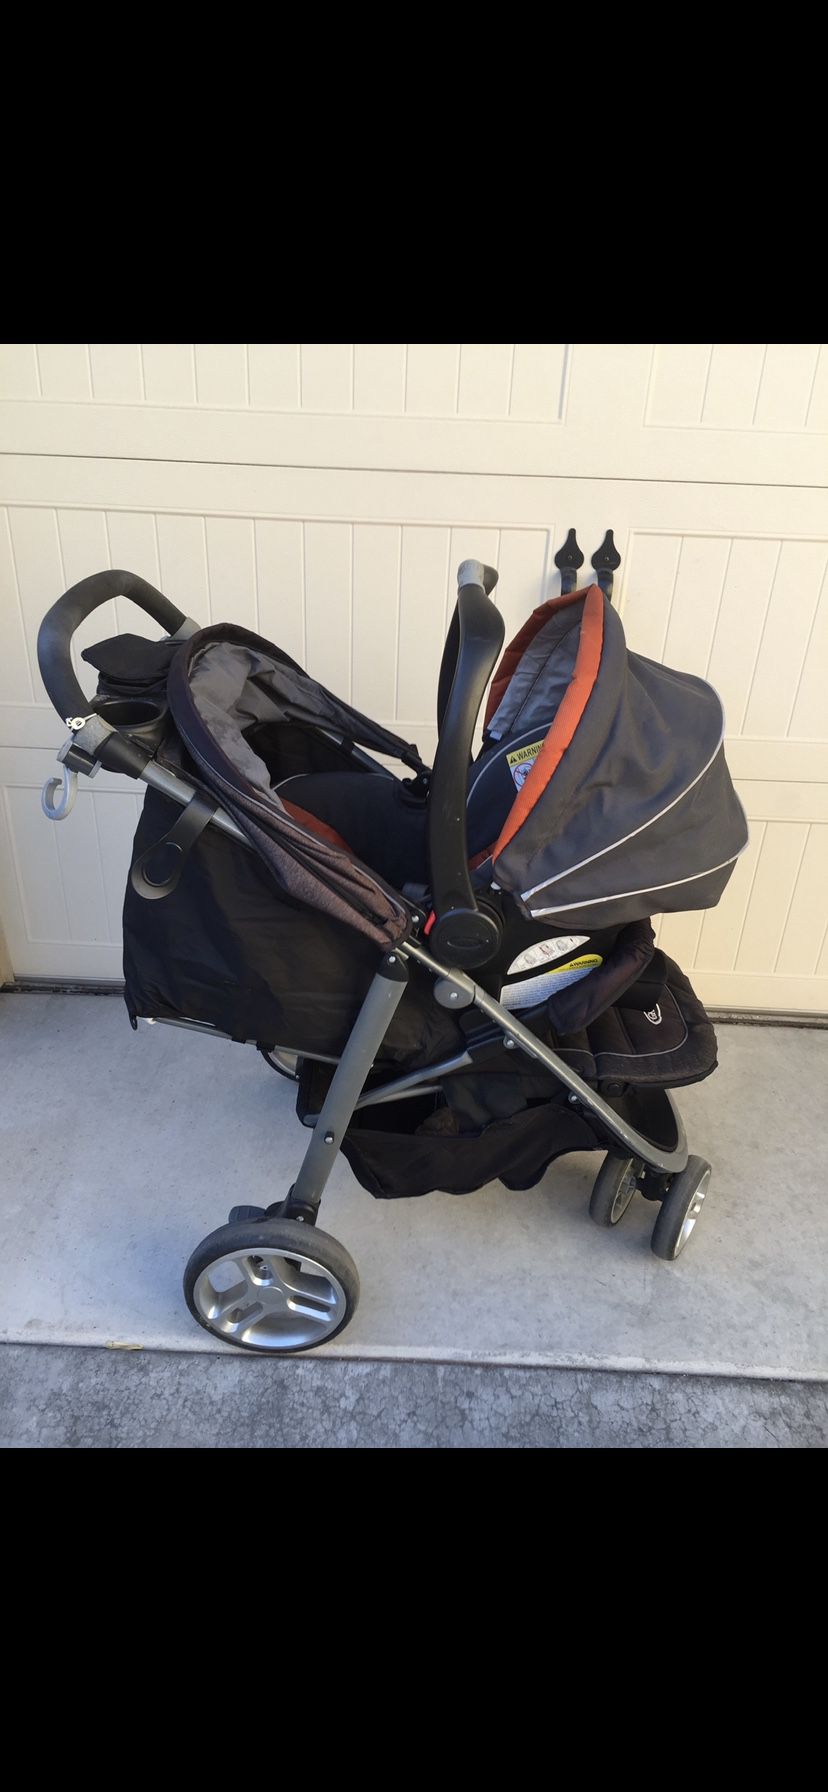 Graco Click connect stroller and car seats